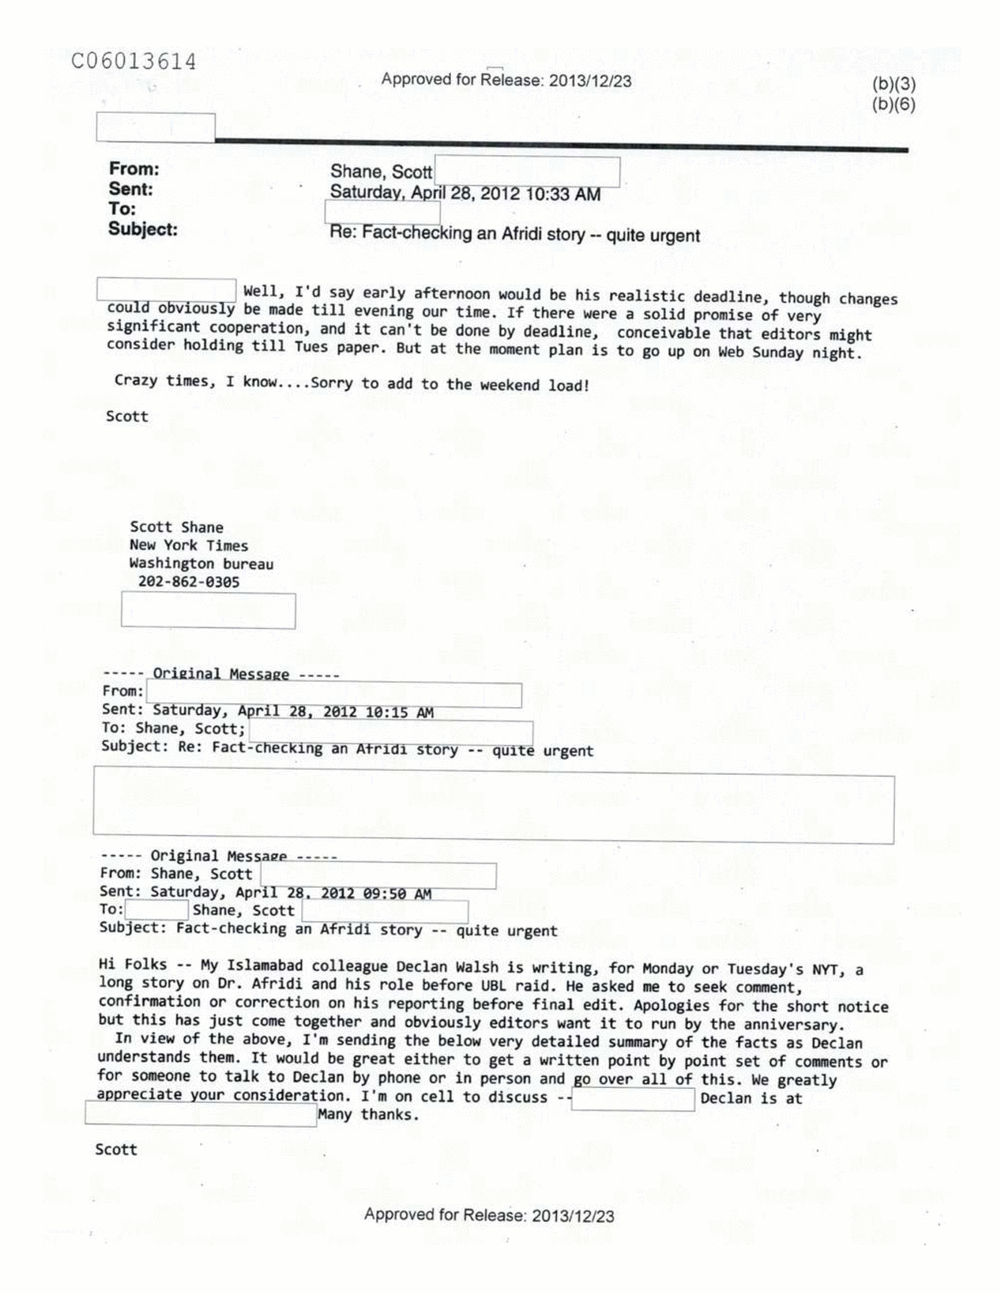 Page 434 from Email Correspondence Between Reporters and CIA Flacks